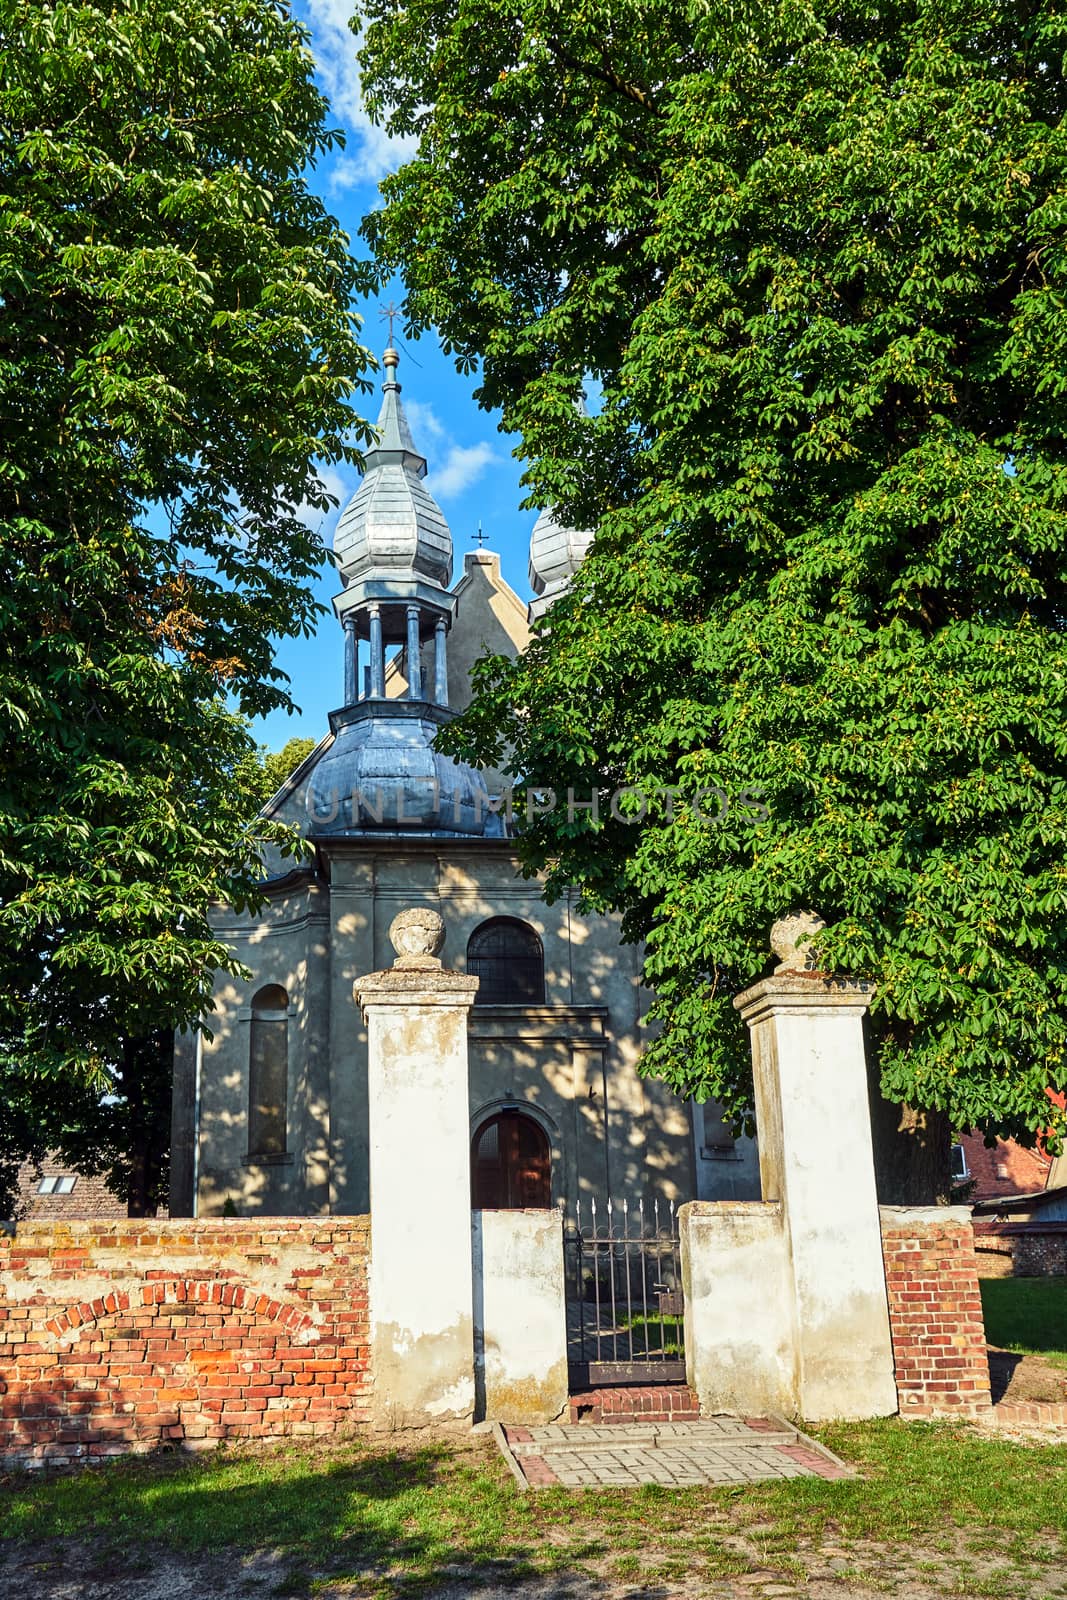 historic parish church with two bell towers in the village of Stary Dworek in Poland